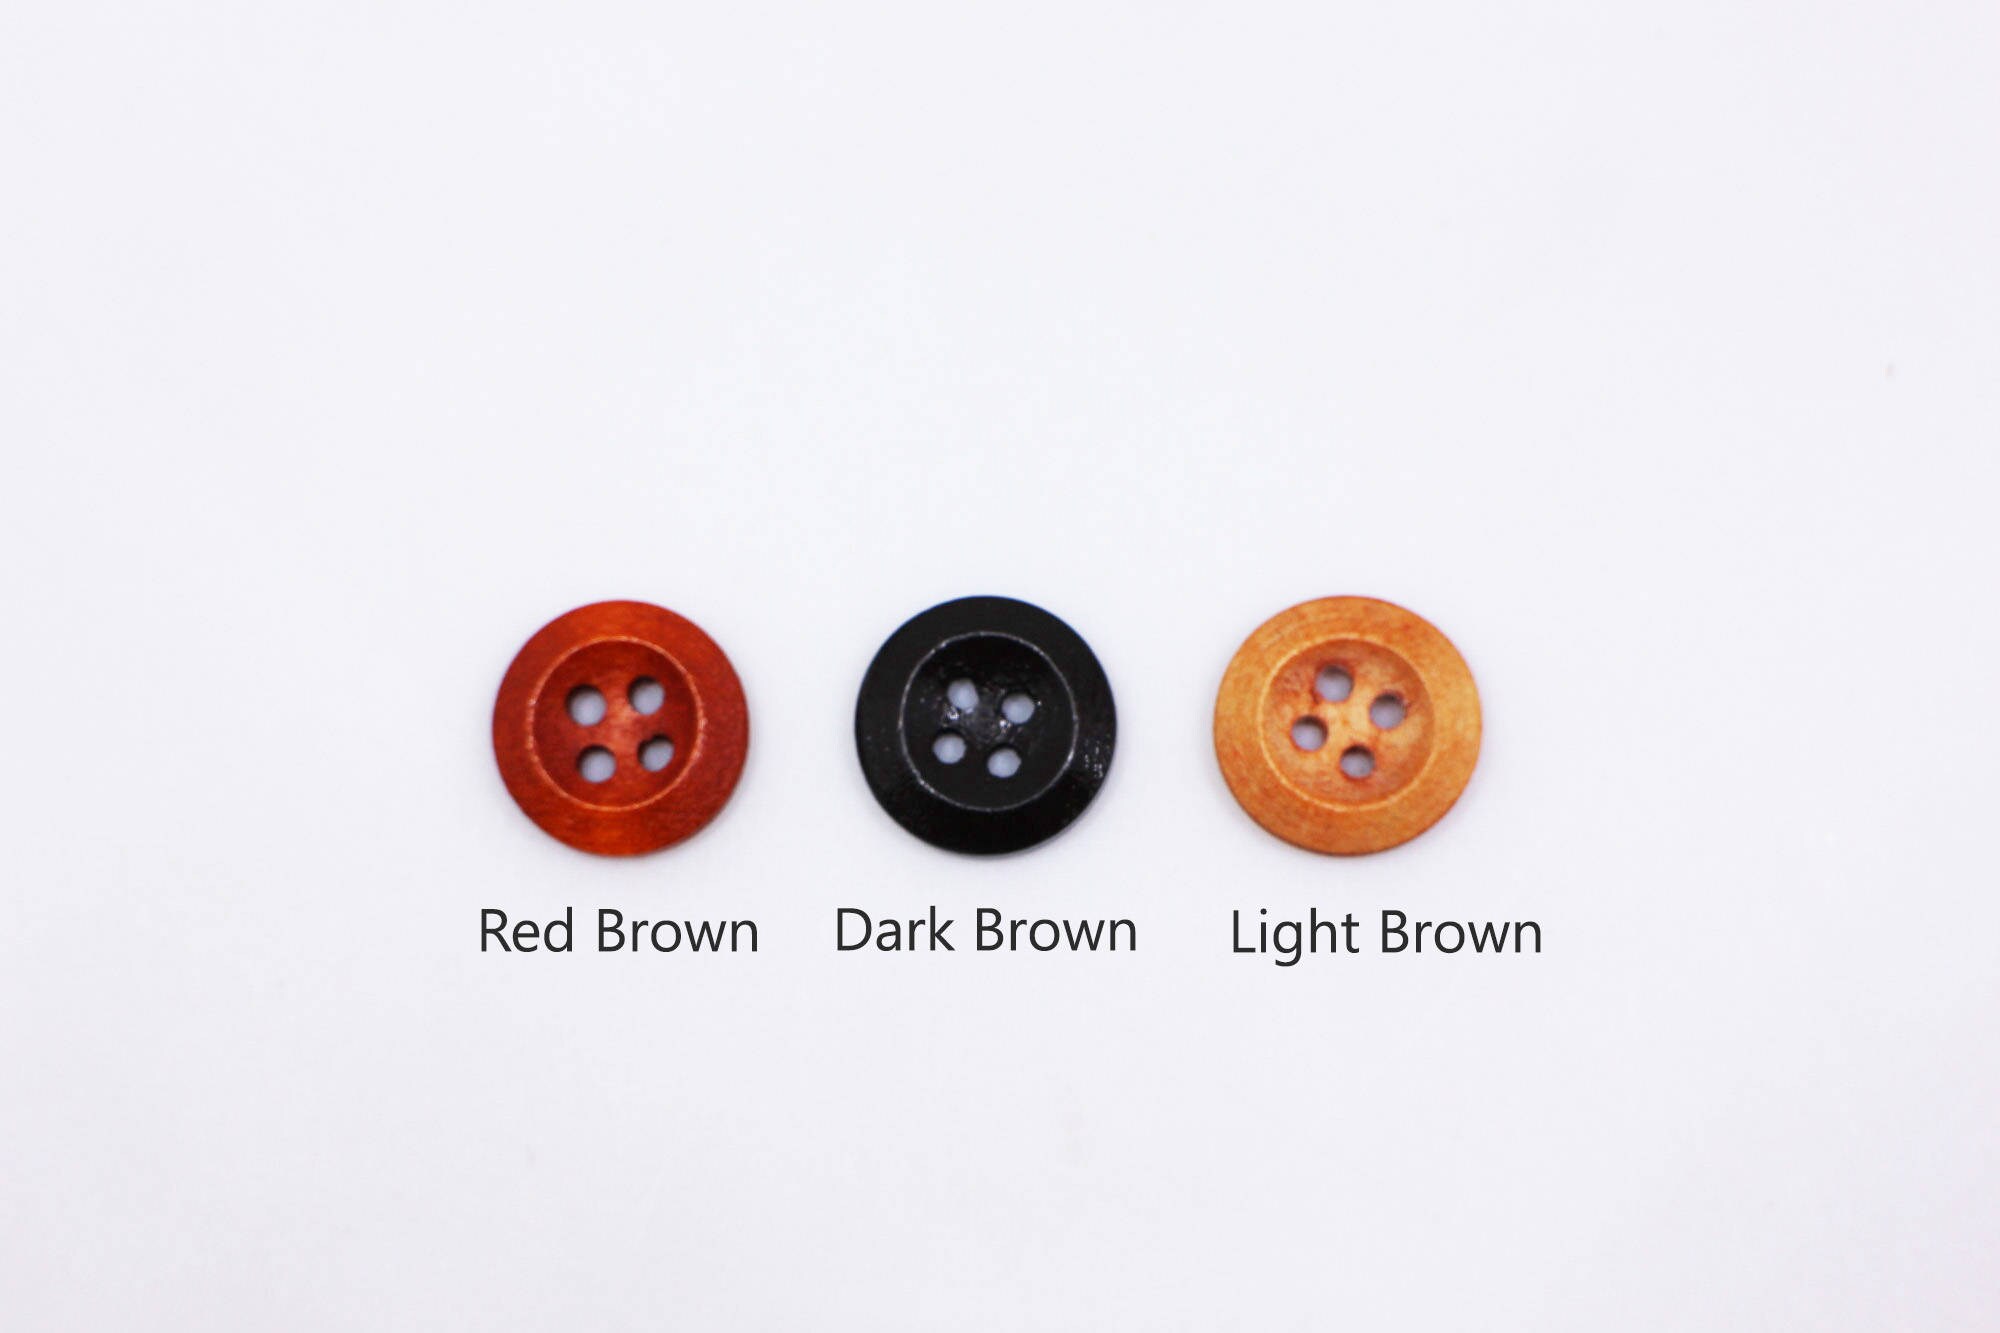 20 X 13mm Coloured Plastic Buttons With an Etched Flower and Two Holes,  Small Assorted Buttons, Sewing Buttons, Knitting Buttons 